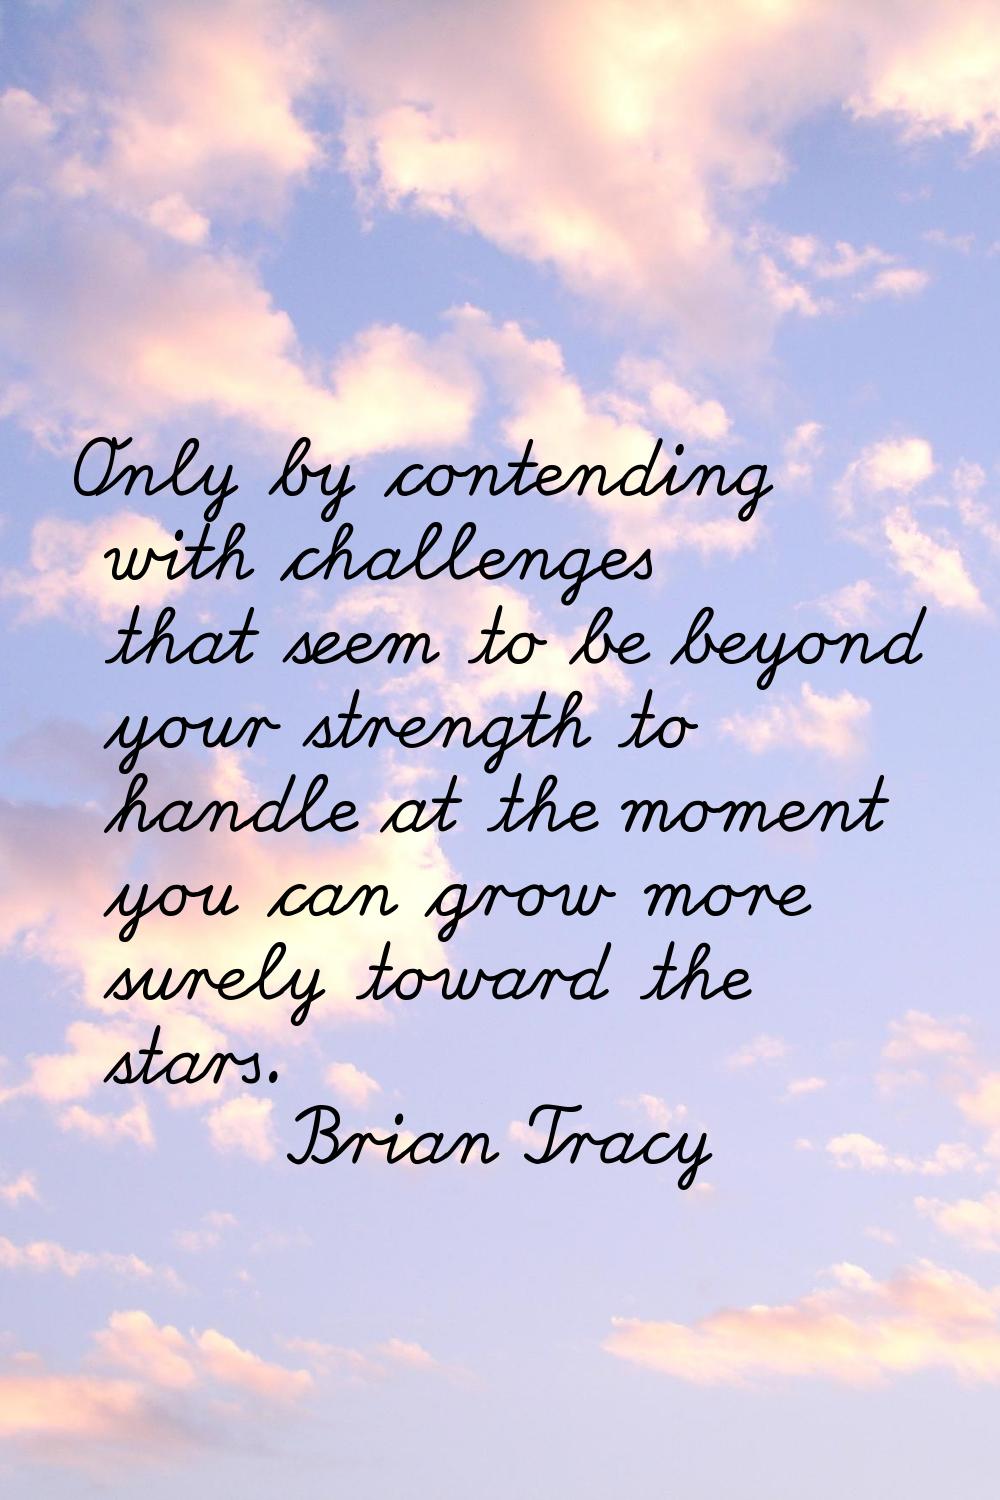 Only by contending with challenges that seem to be beyond your strength to handle at the moment you